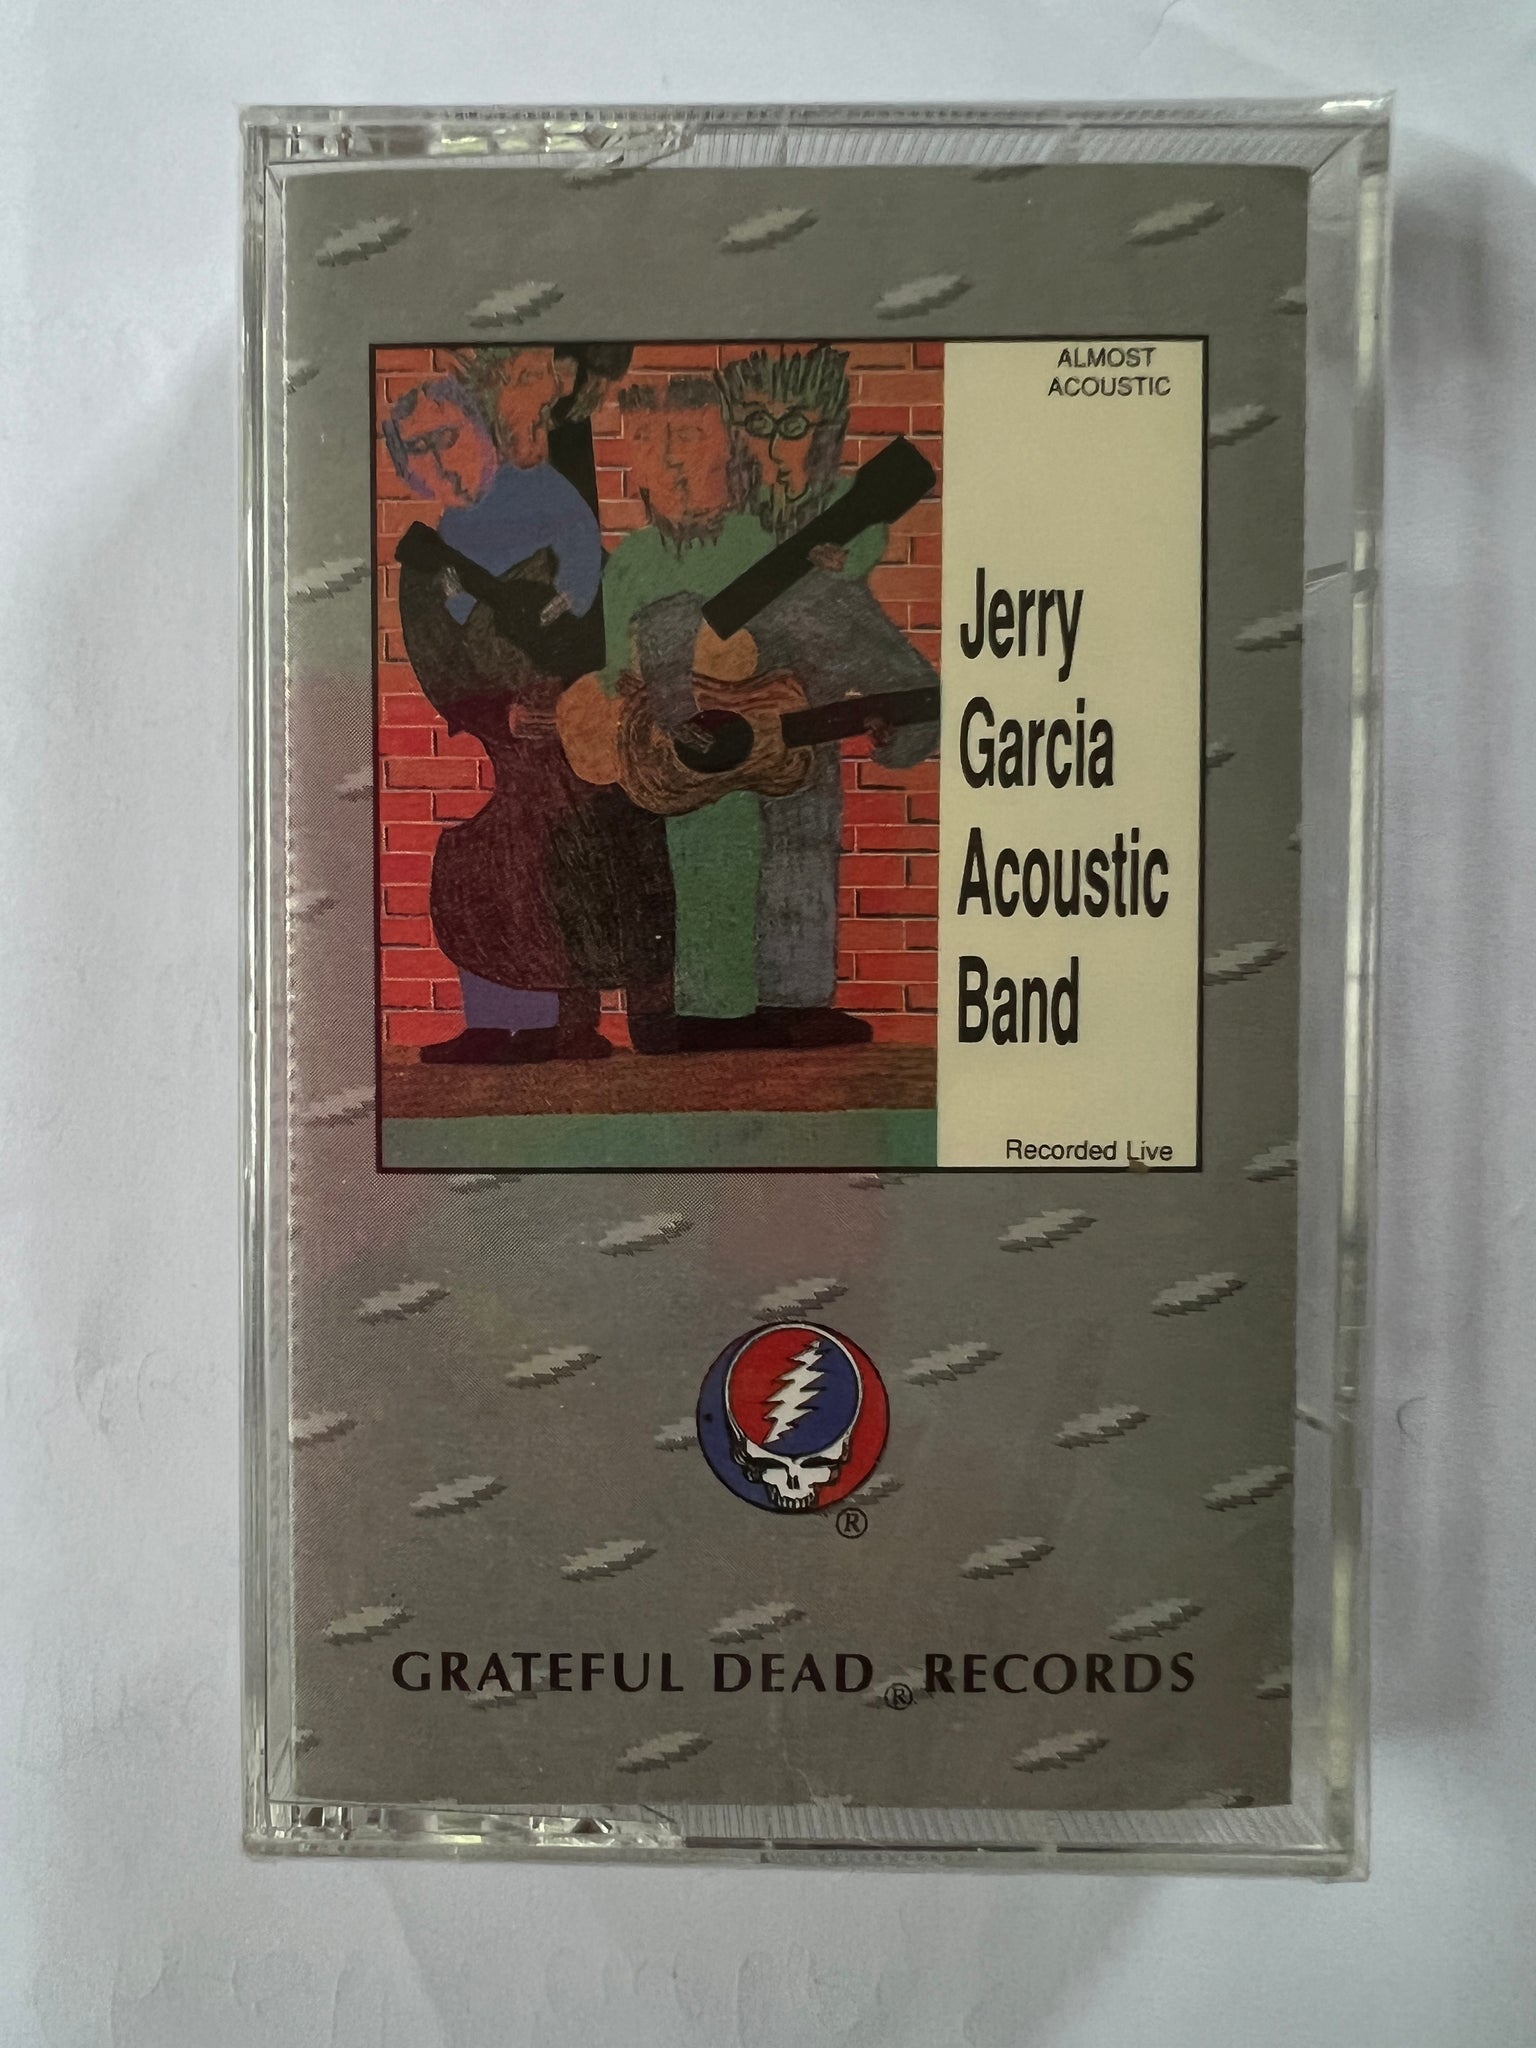 Jerry Garcia Band "Almost Acoustic" Cassette